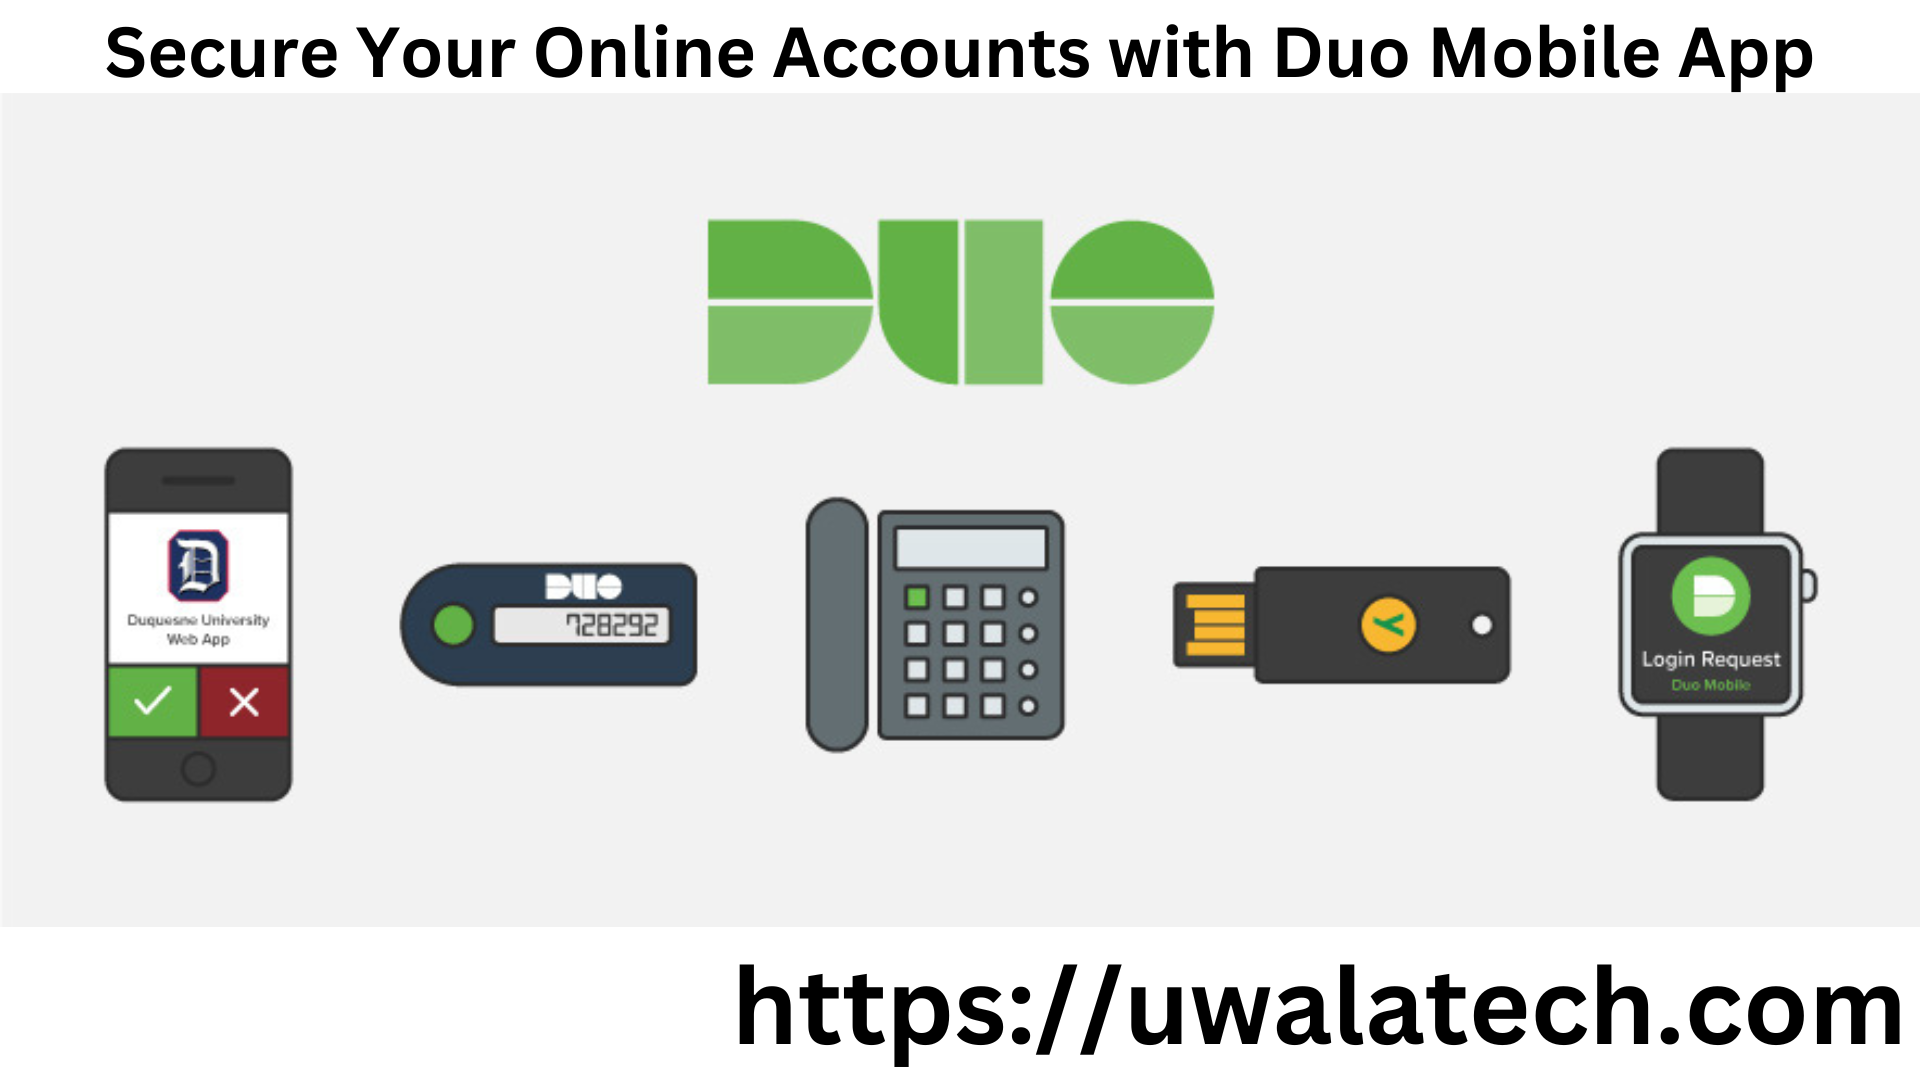 Secure Your Online Accounts with Duo Mobile App